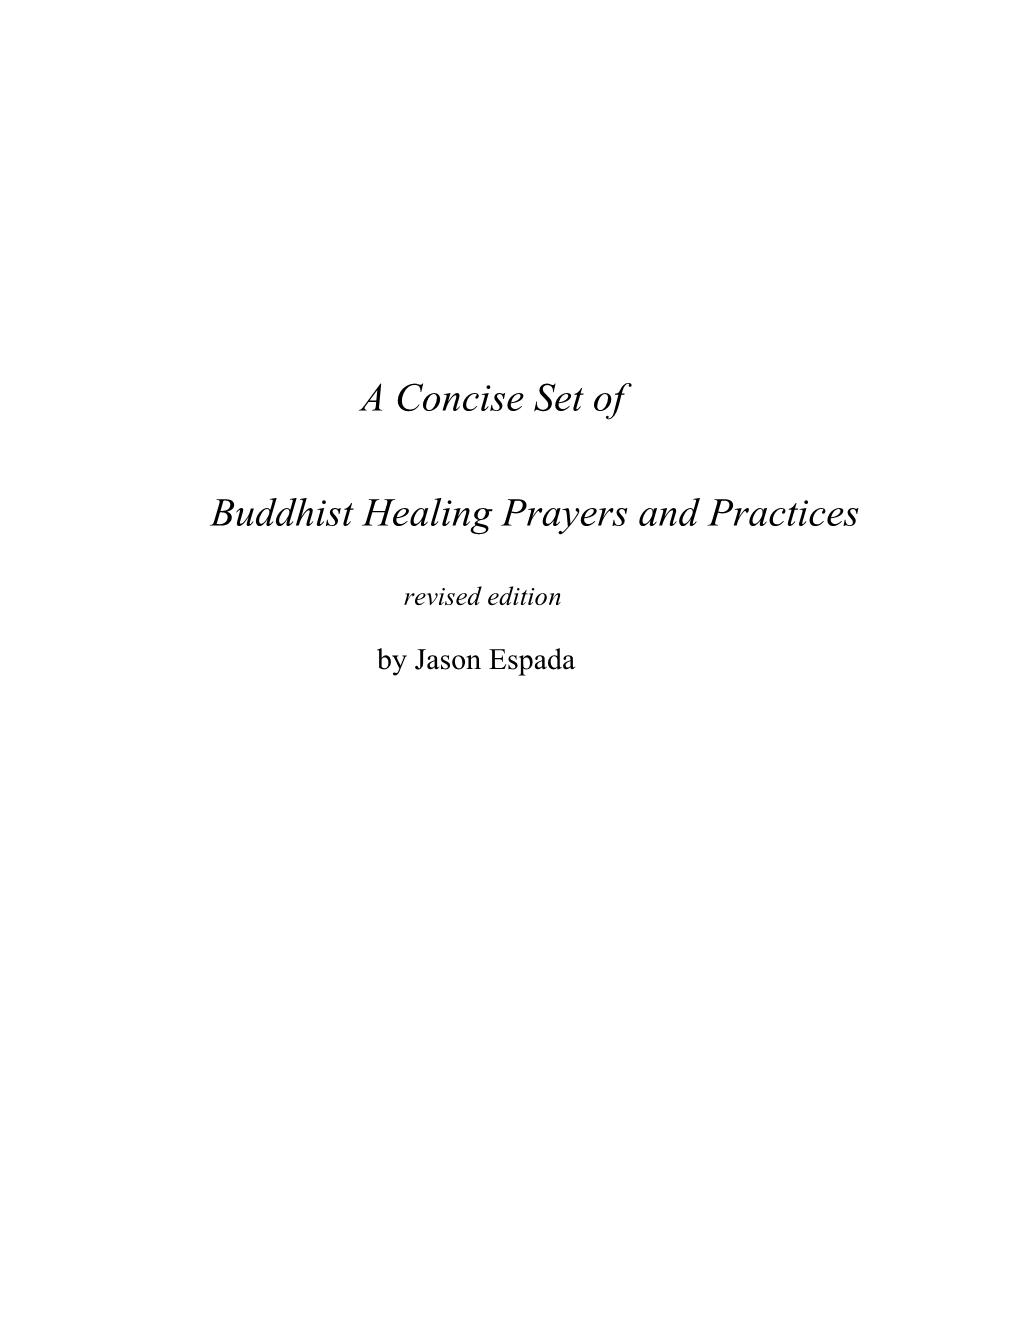 A Concise Set of Buddhist Healing Prayers and Practices – Preface